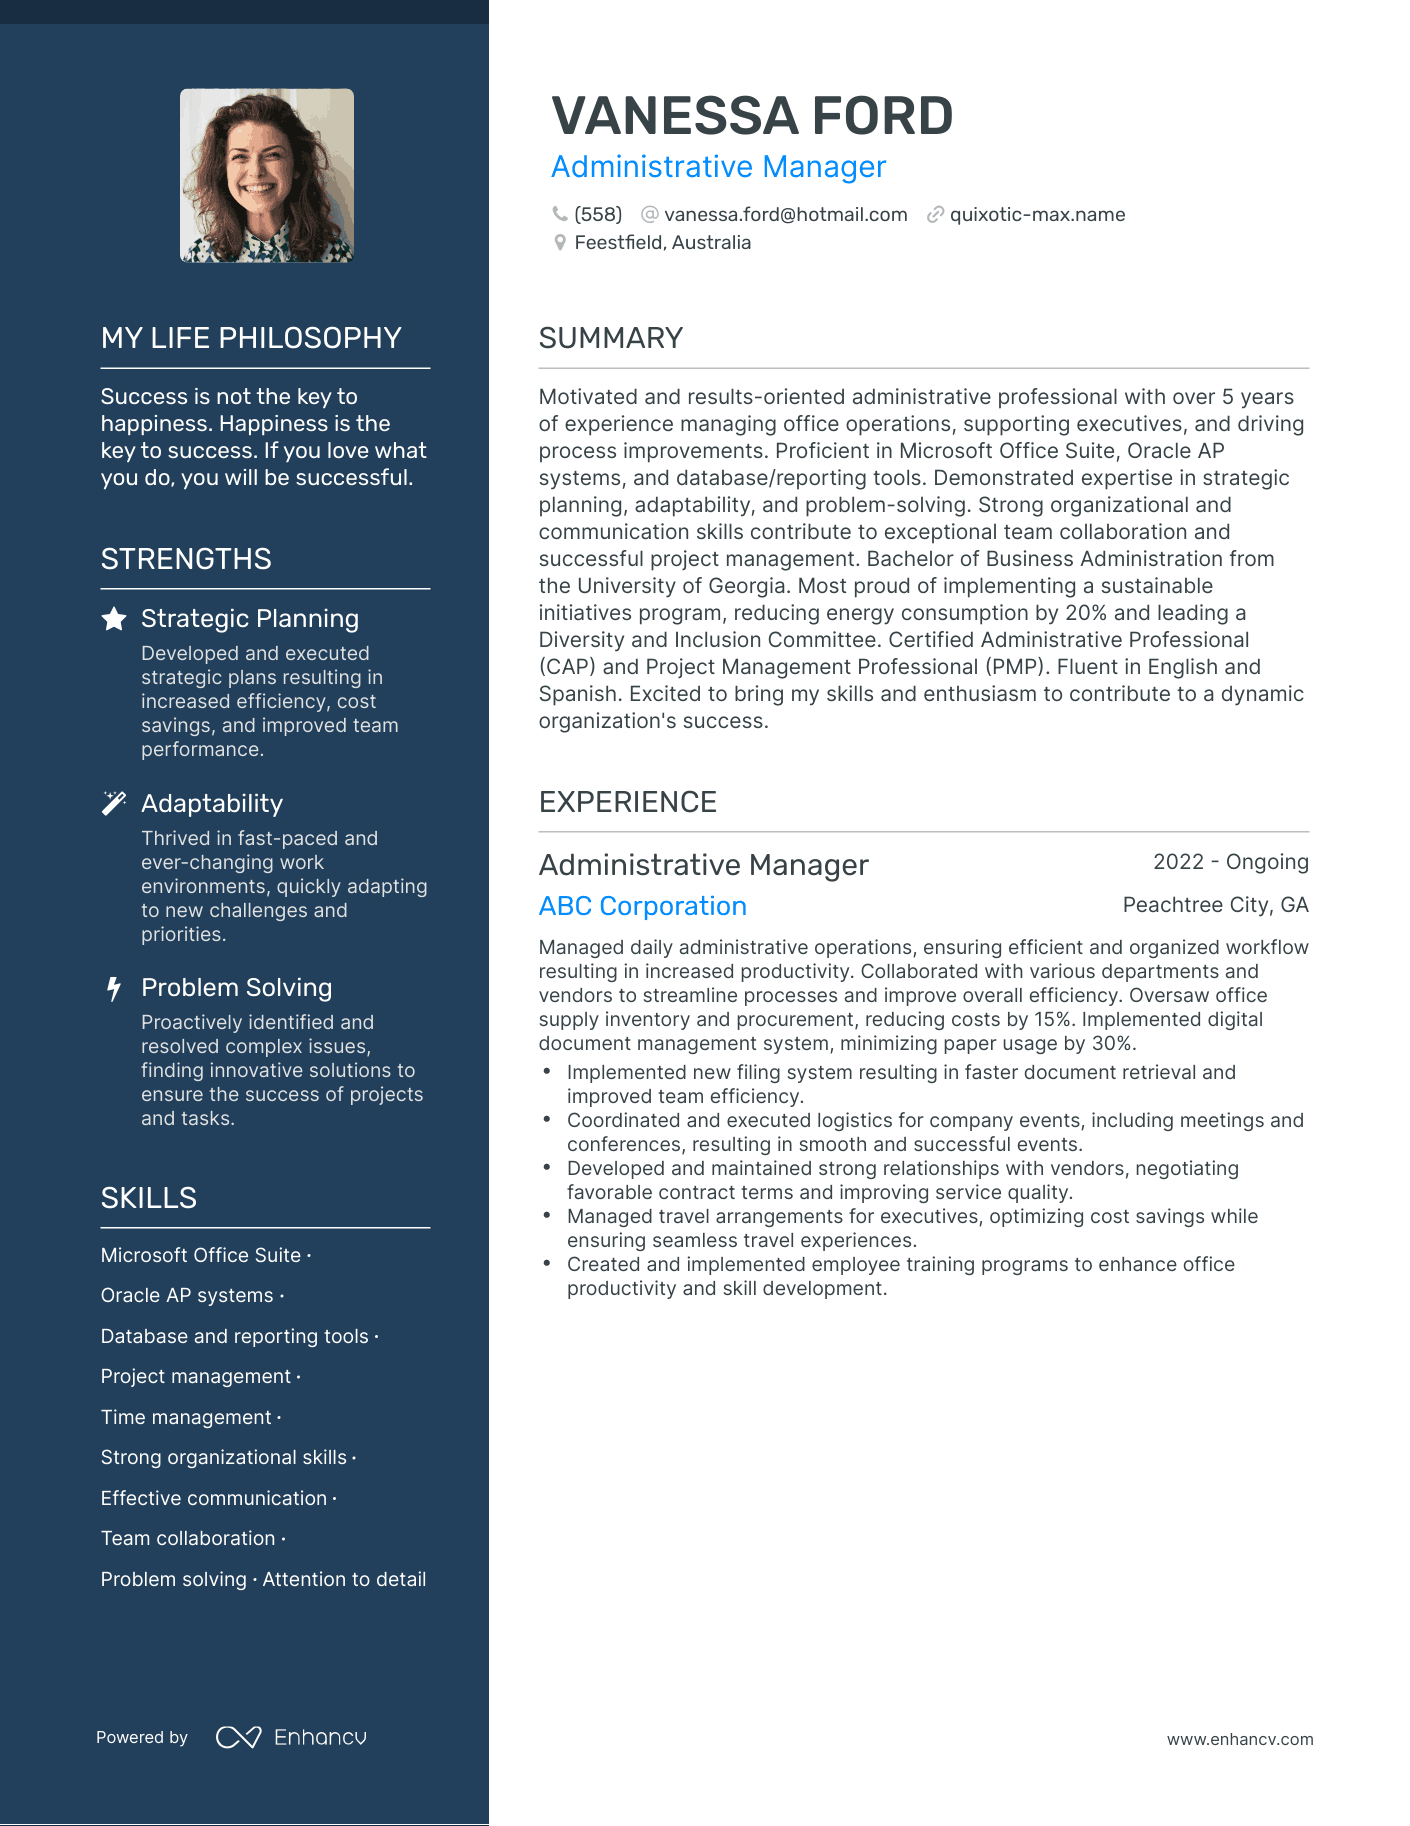 Administrative Manager resume example